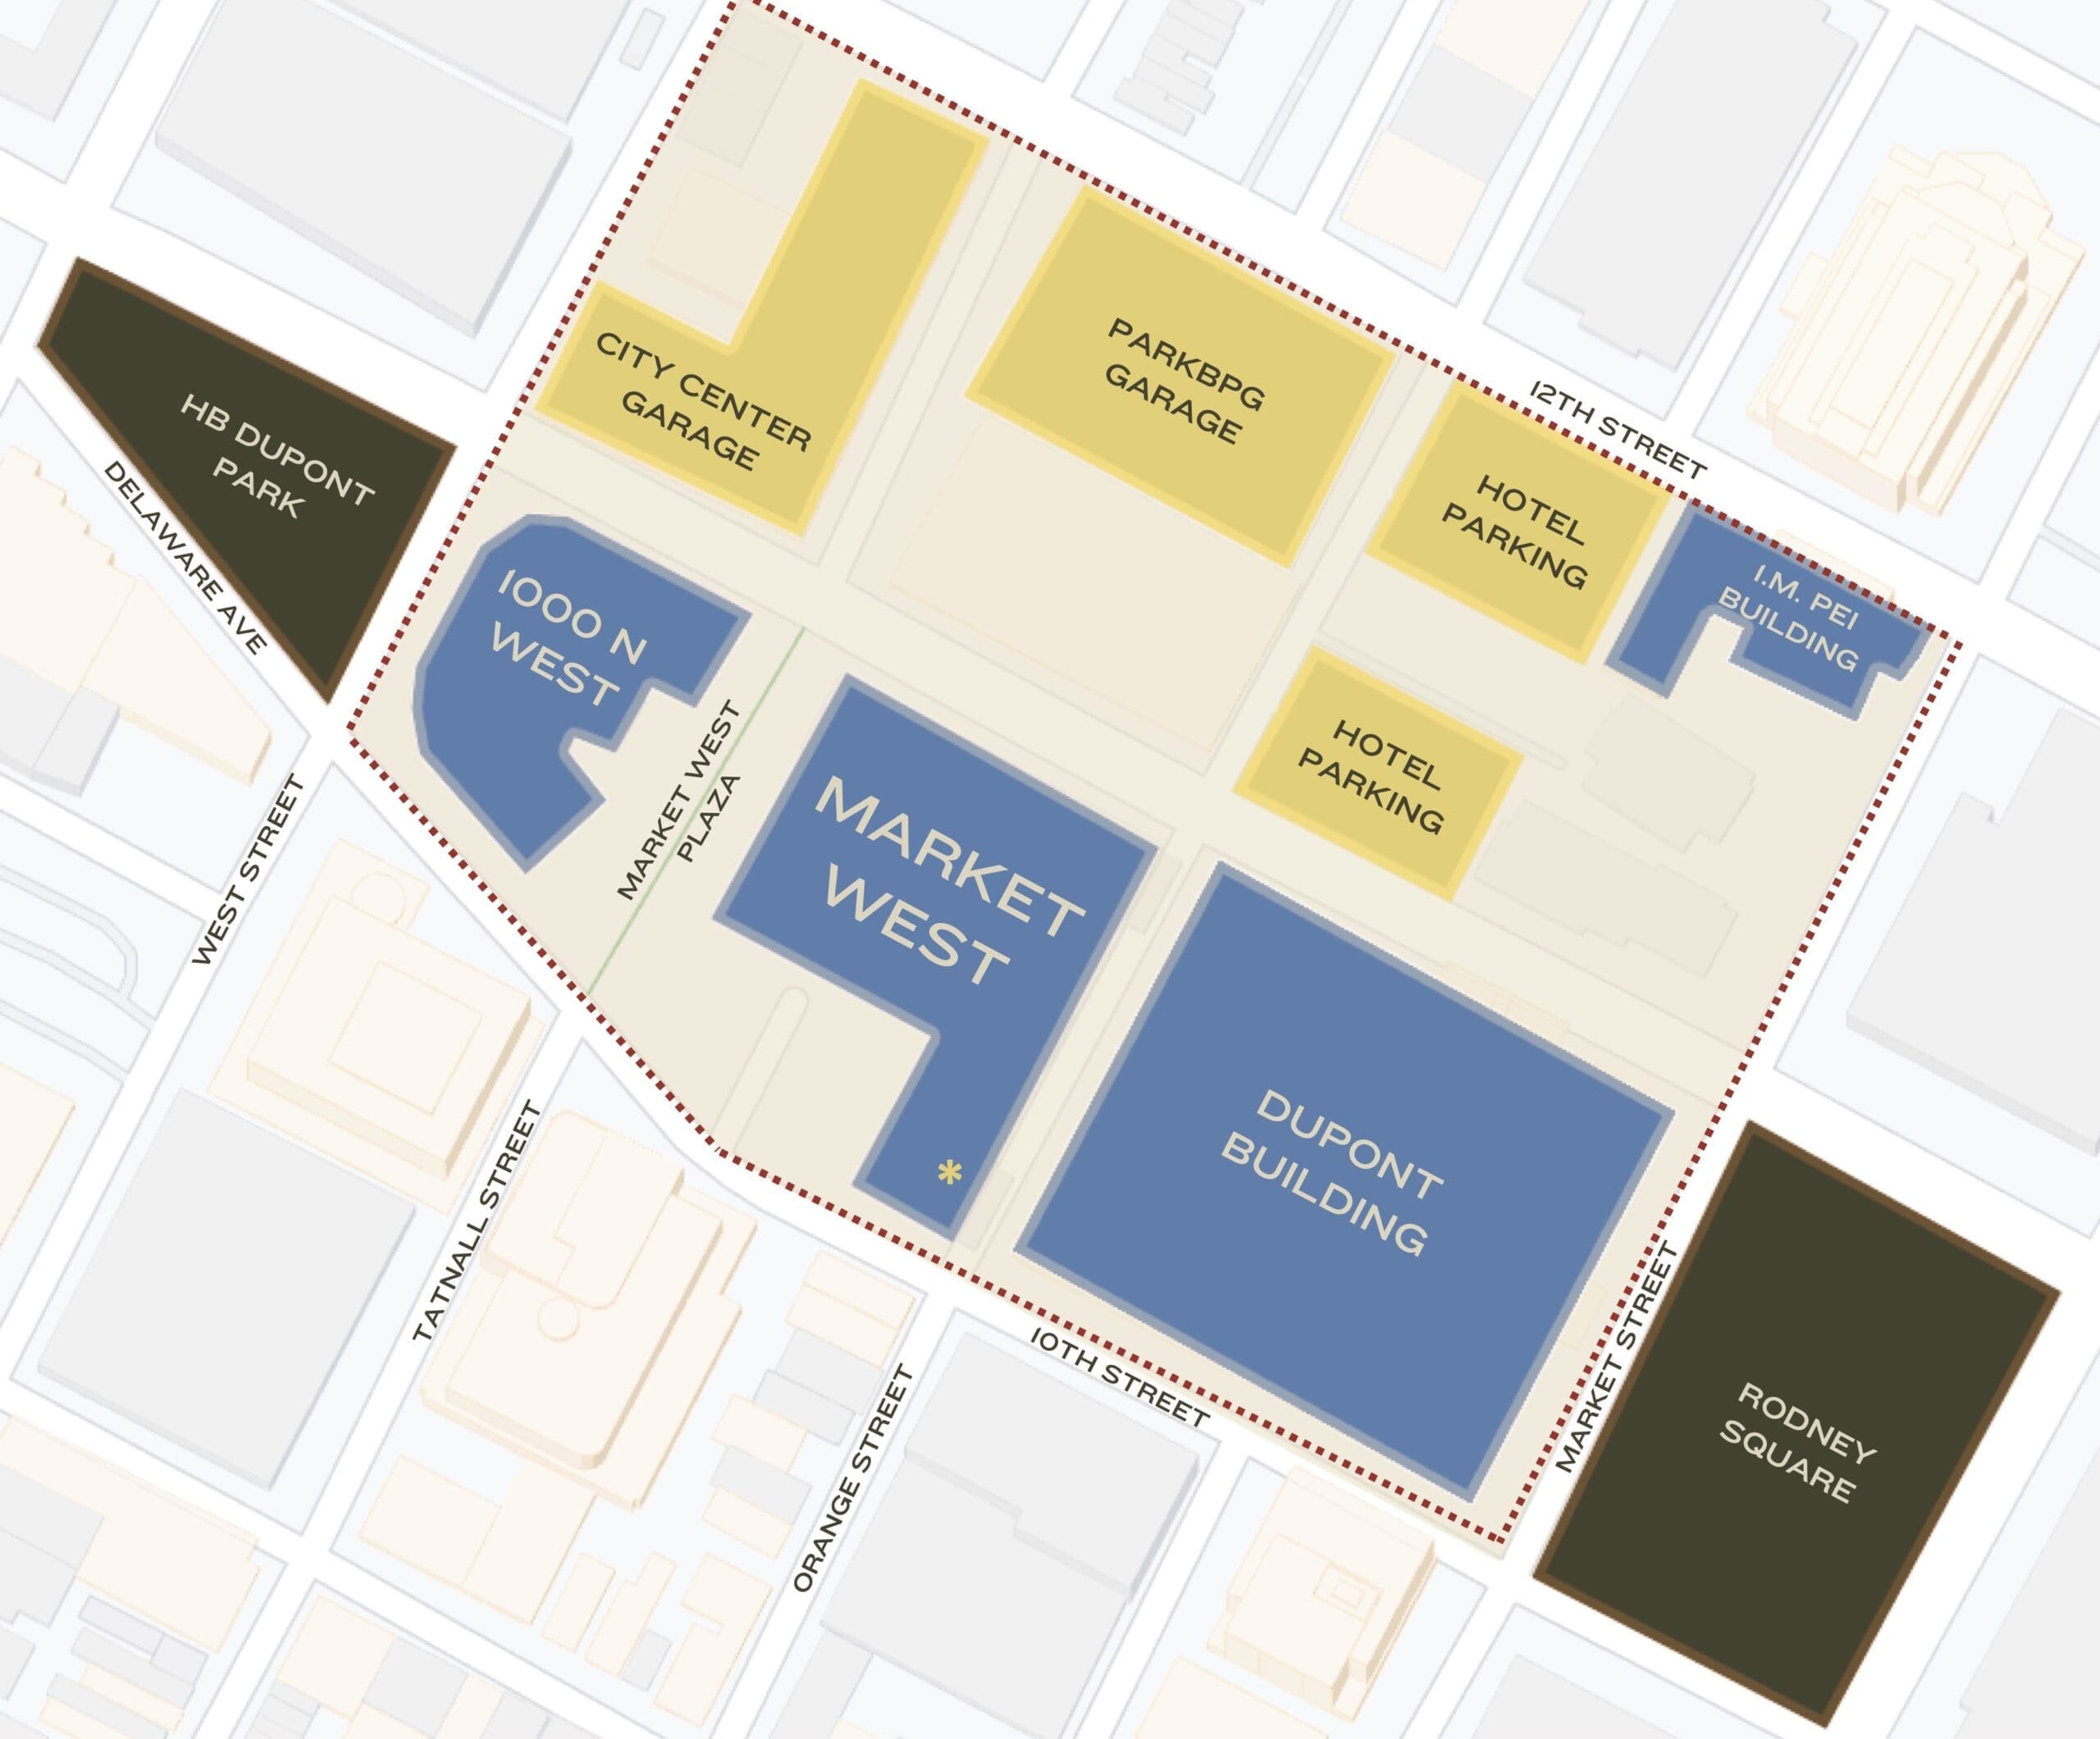 Market West is the new name for five blocks that go from Market to West streets and Delaware Avenue and 12th Street. (Buccini/Pollin Group)